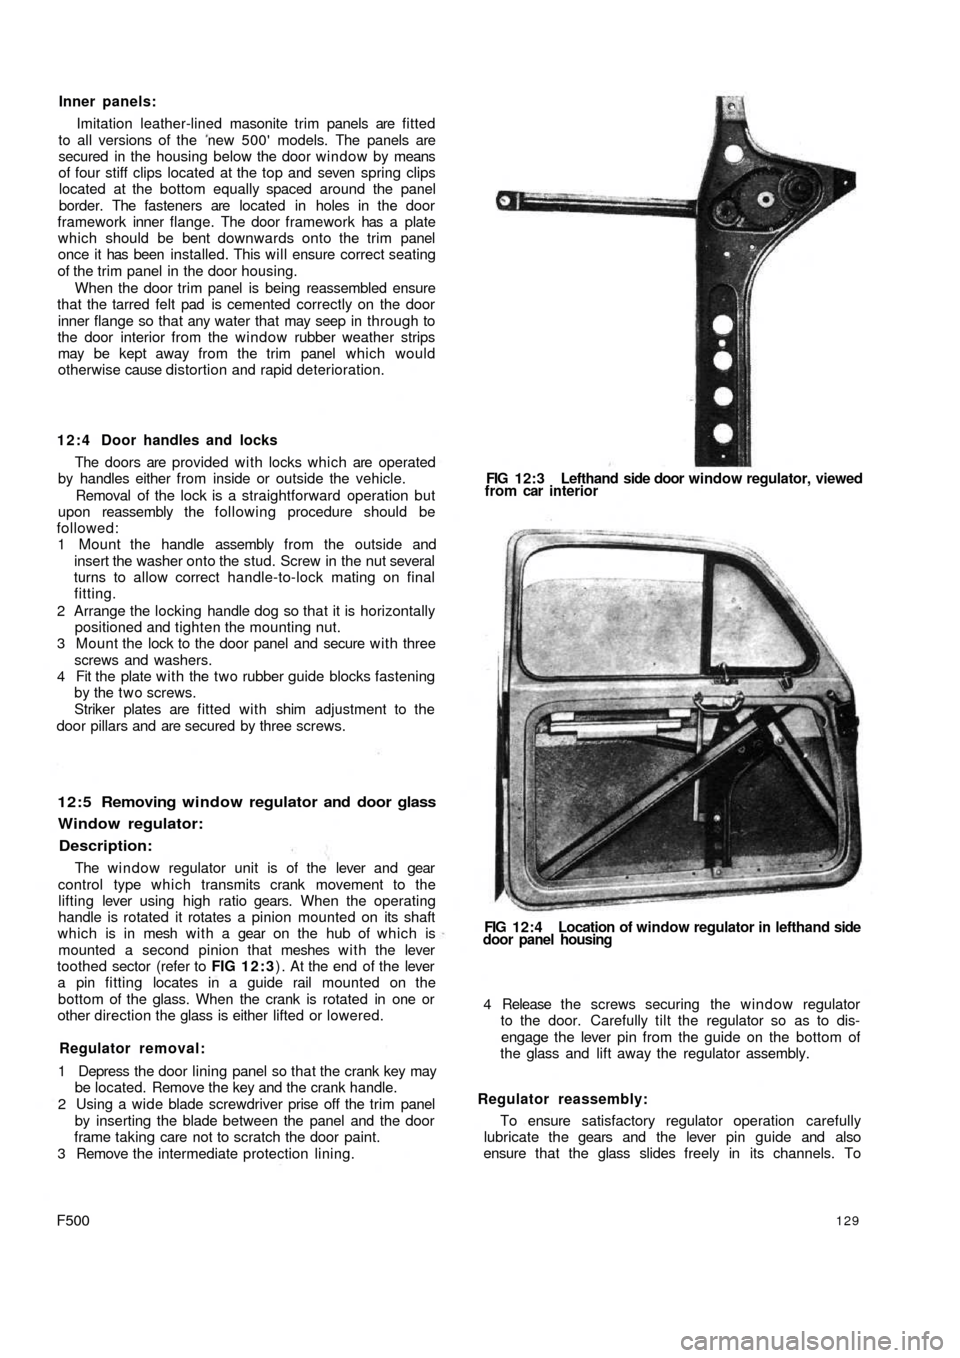 FIAT 500 1957 1.G Workshop Manual Inner panels:
Imitation leather-lined masonite trim panels are fitted
to all versions of the  new 500 models. The panels are
secured in the housing below the door window by means
of four stiff clips 